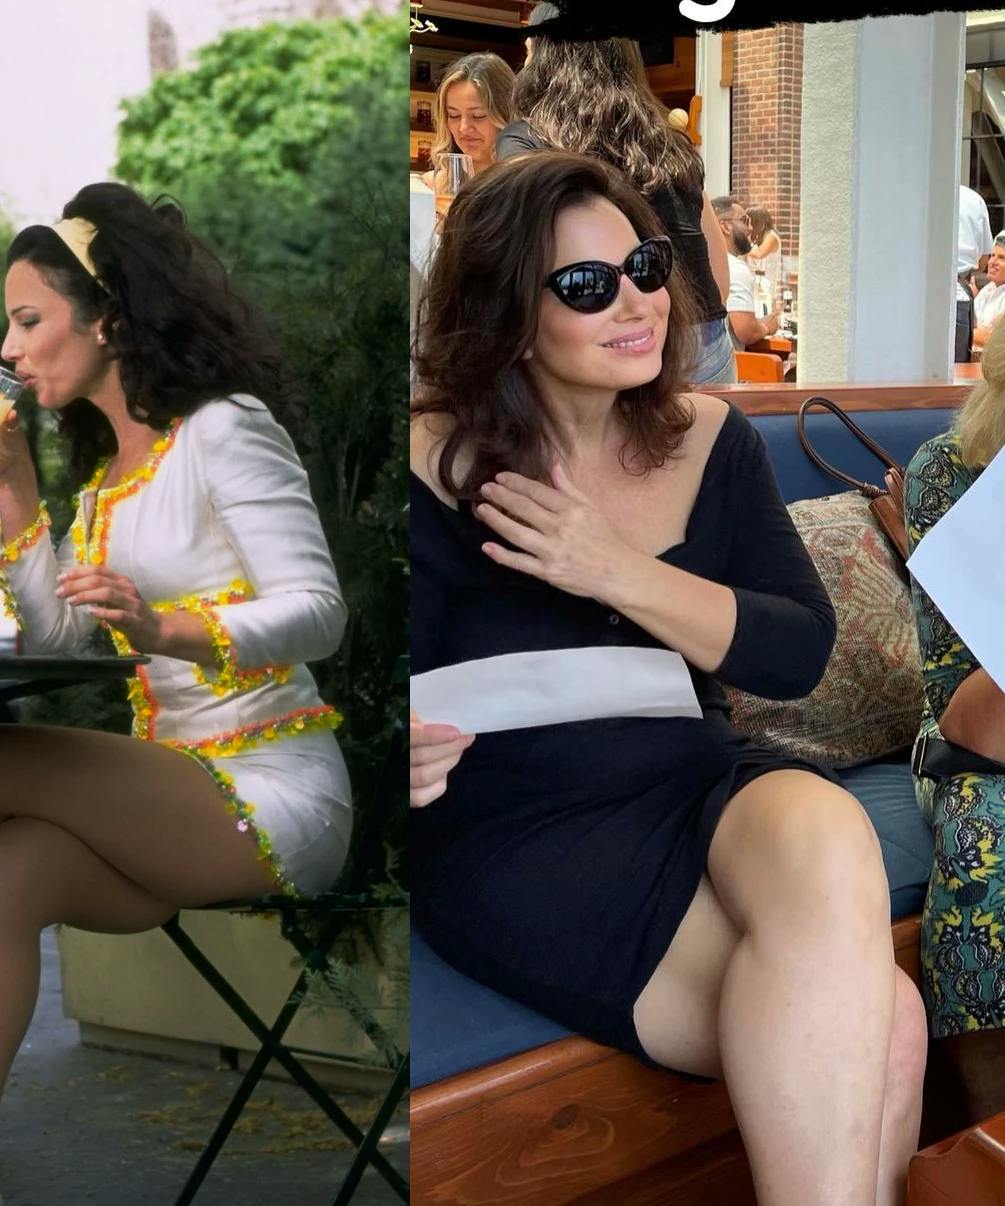 Fran Drescher, Michelle Pfeiffer, And More: Stars With Amazing Style Both Then And Now